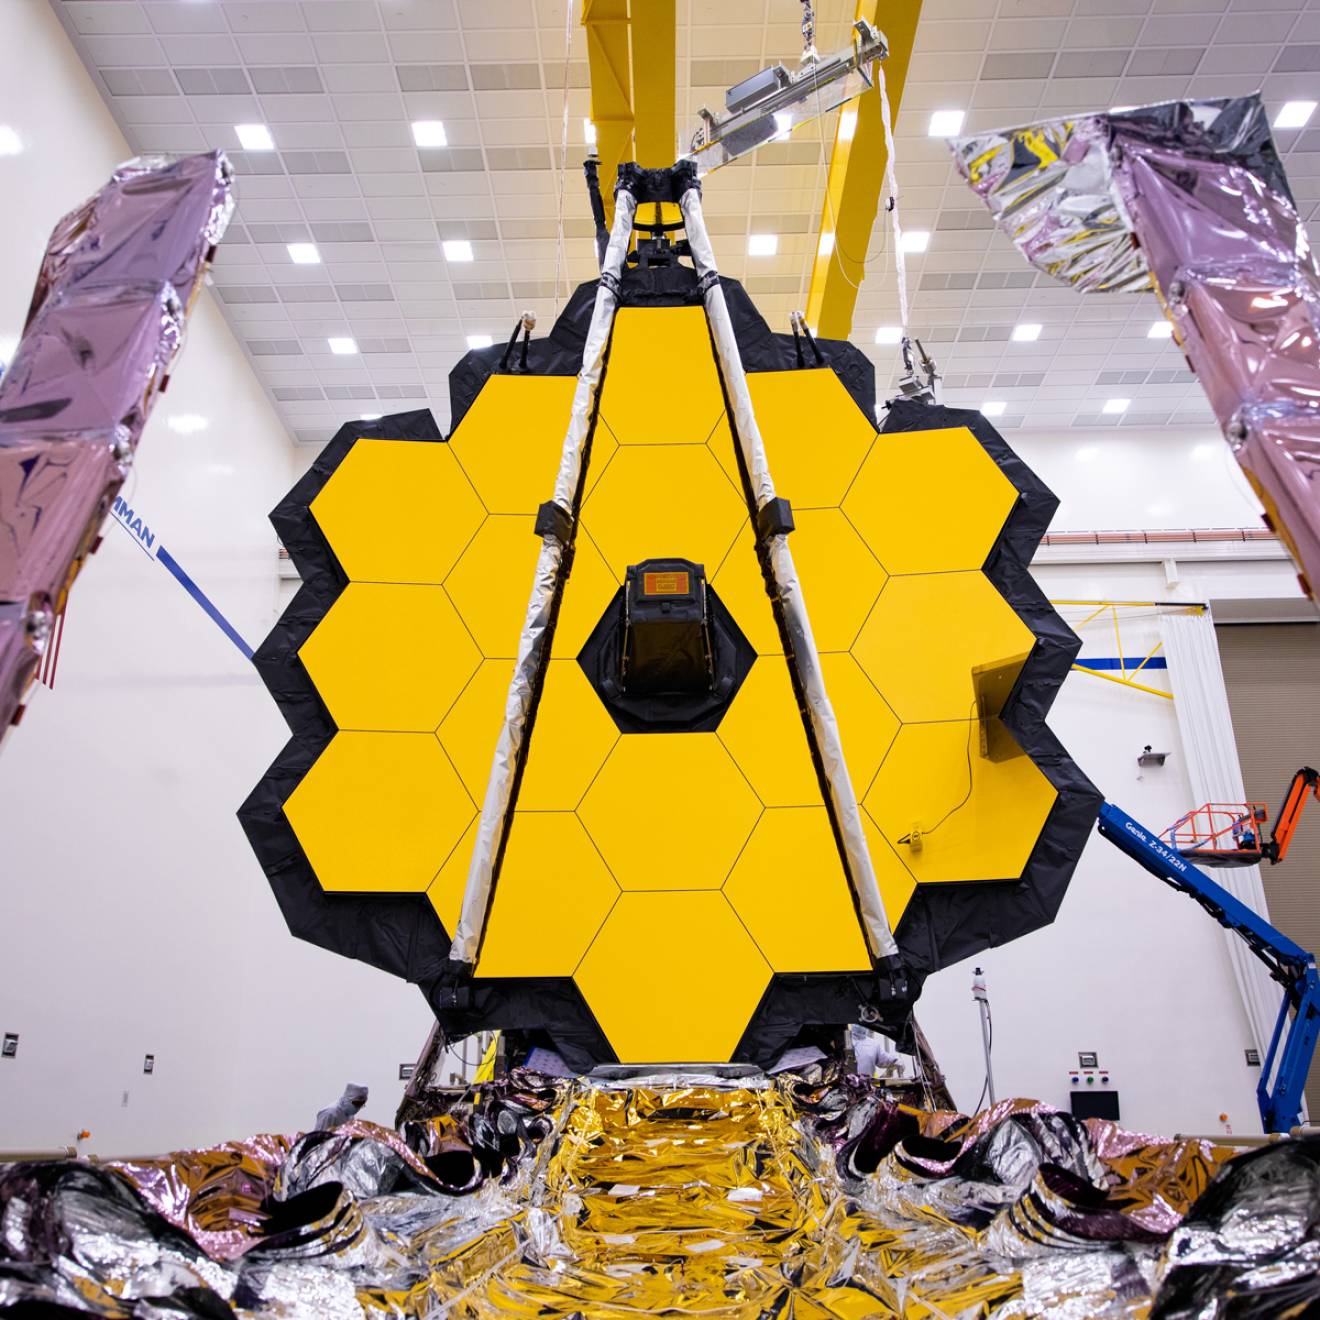 The fully assembled James Webb Space Telescope with its sunshield and unitized pallet structures that will fold up around the telescope for launch